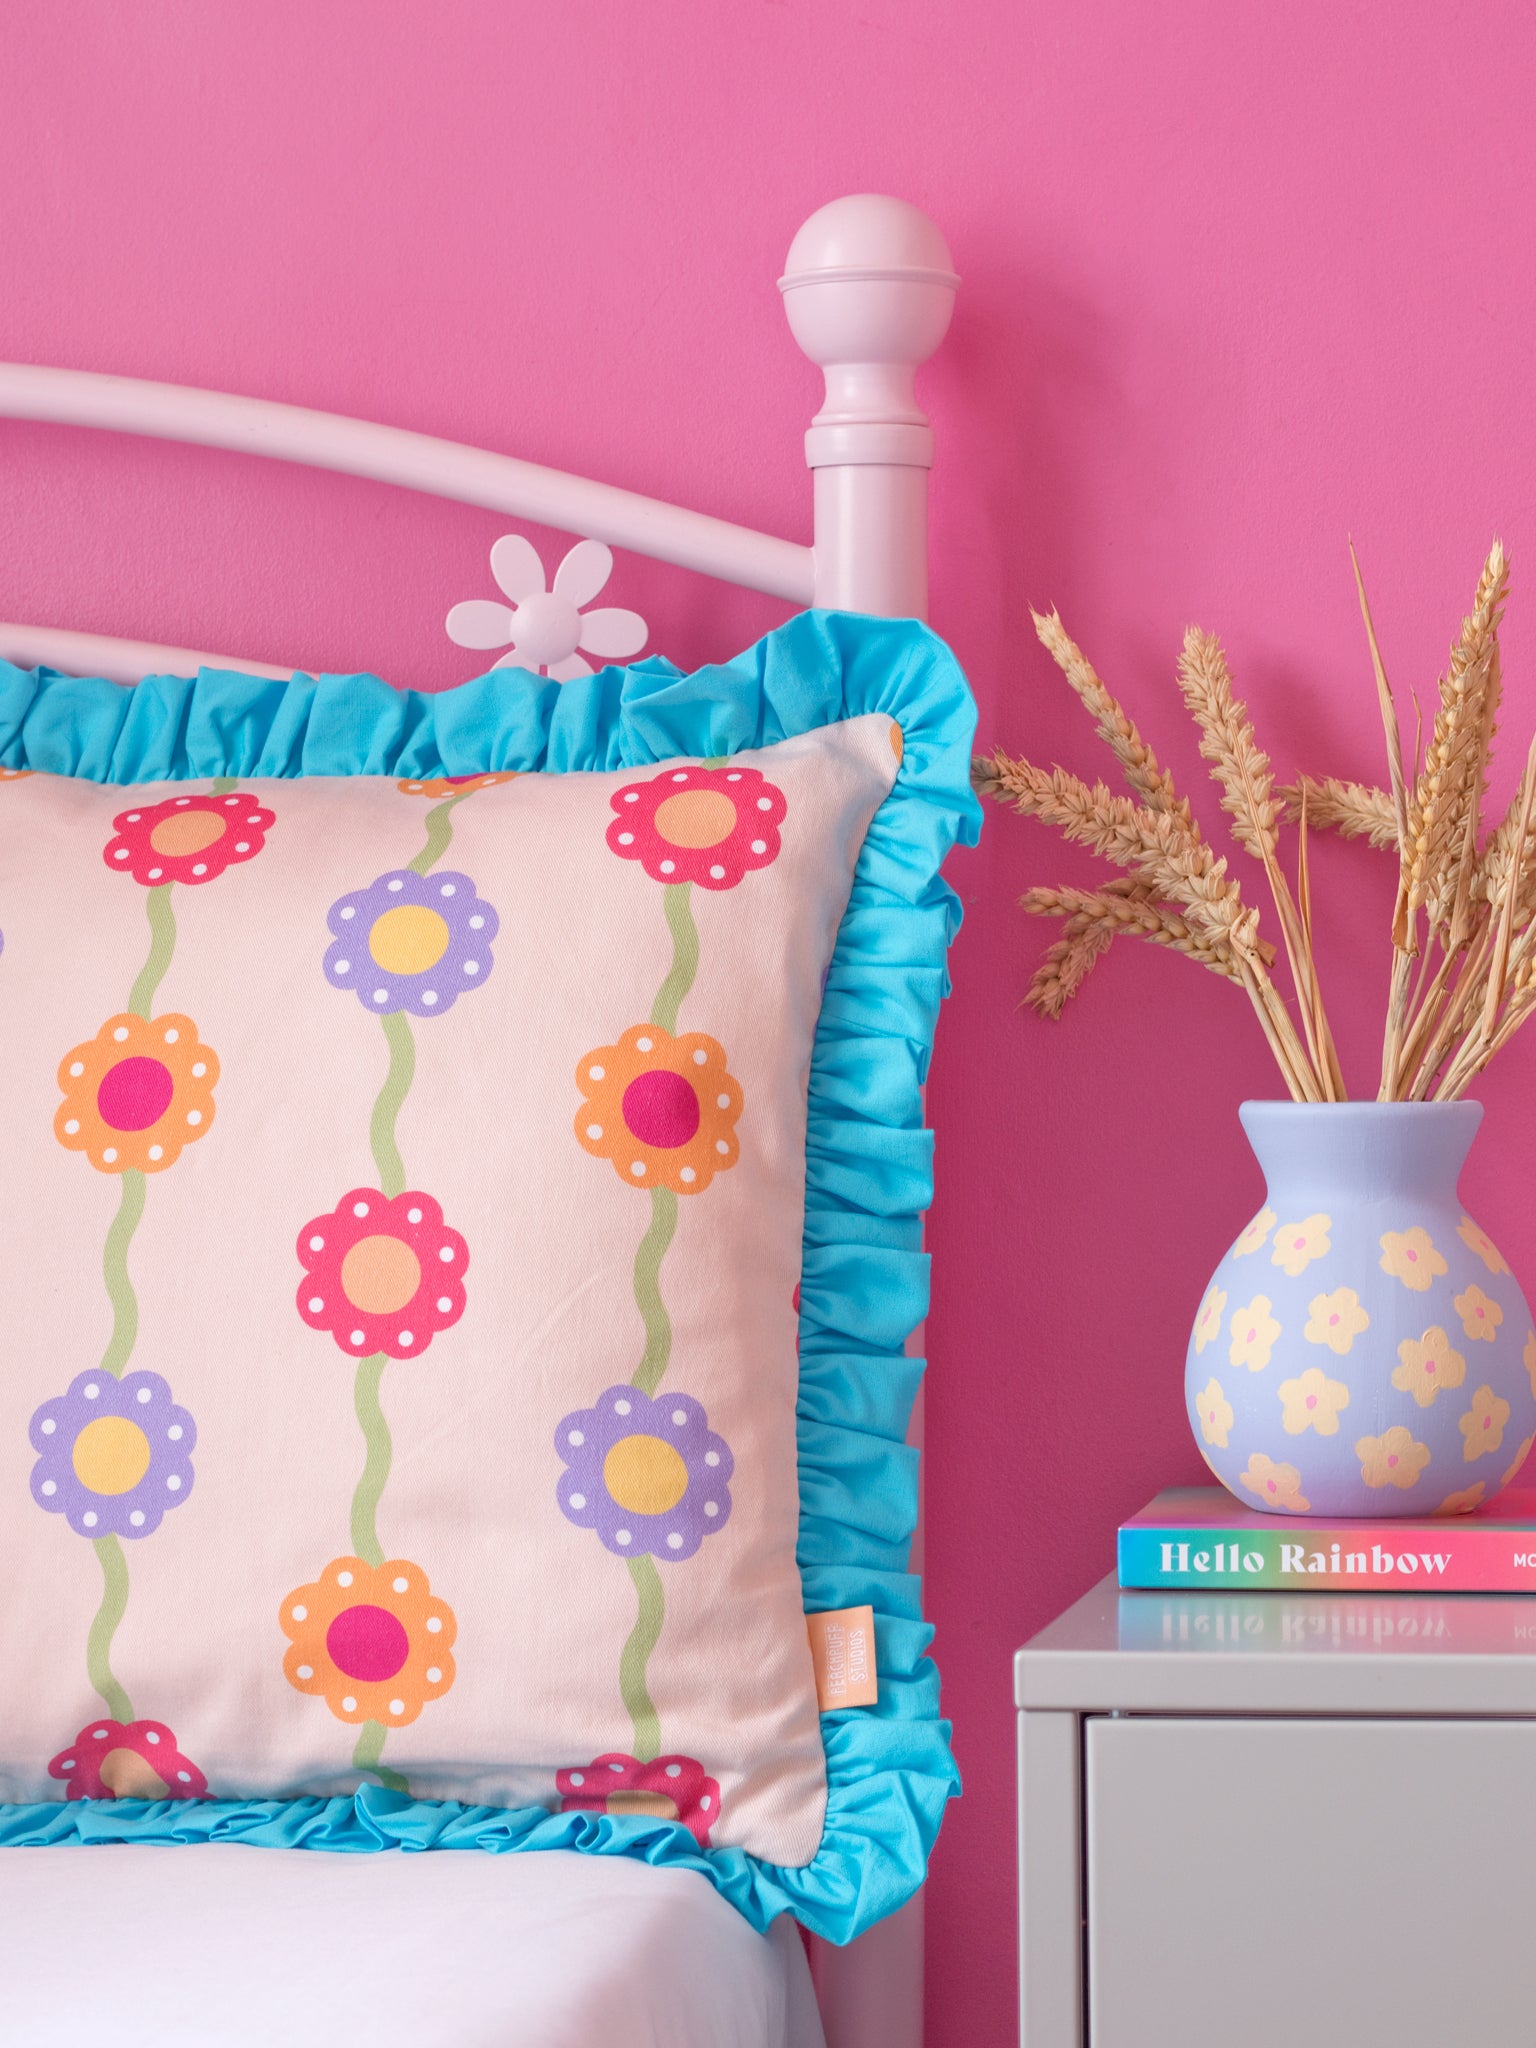 A pink floral printed cushion with blue ruffles on a pink flower bed next to a dressing table styled with dried flowers and a book.